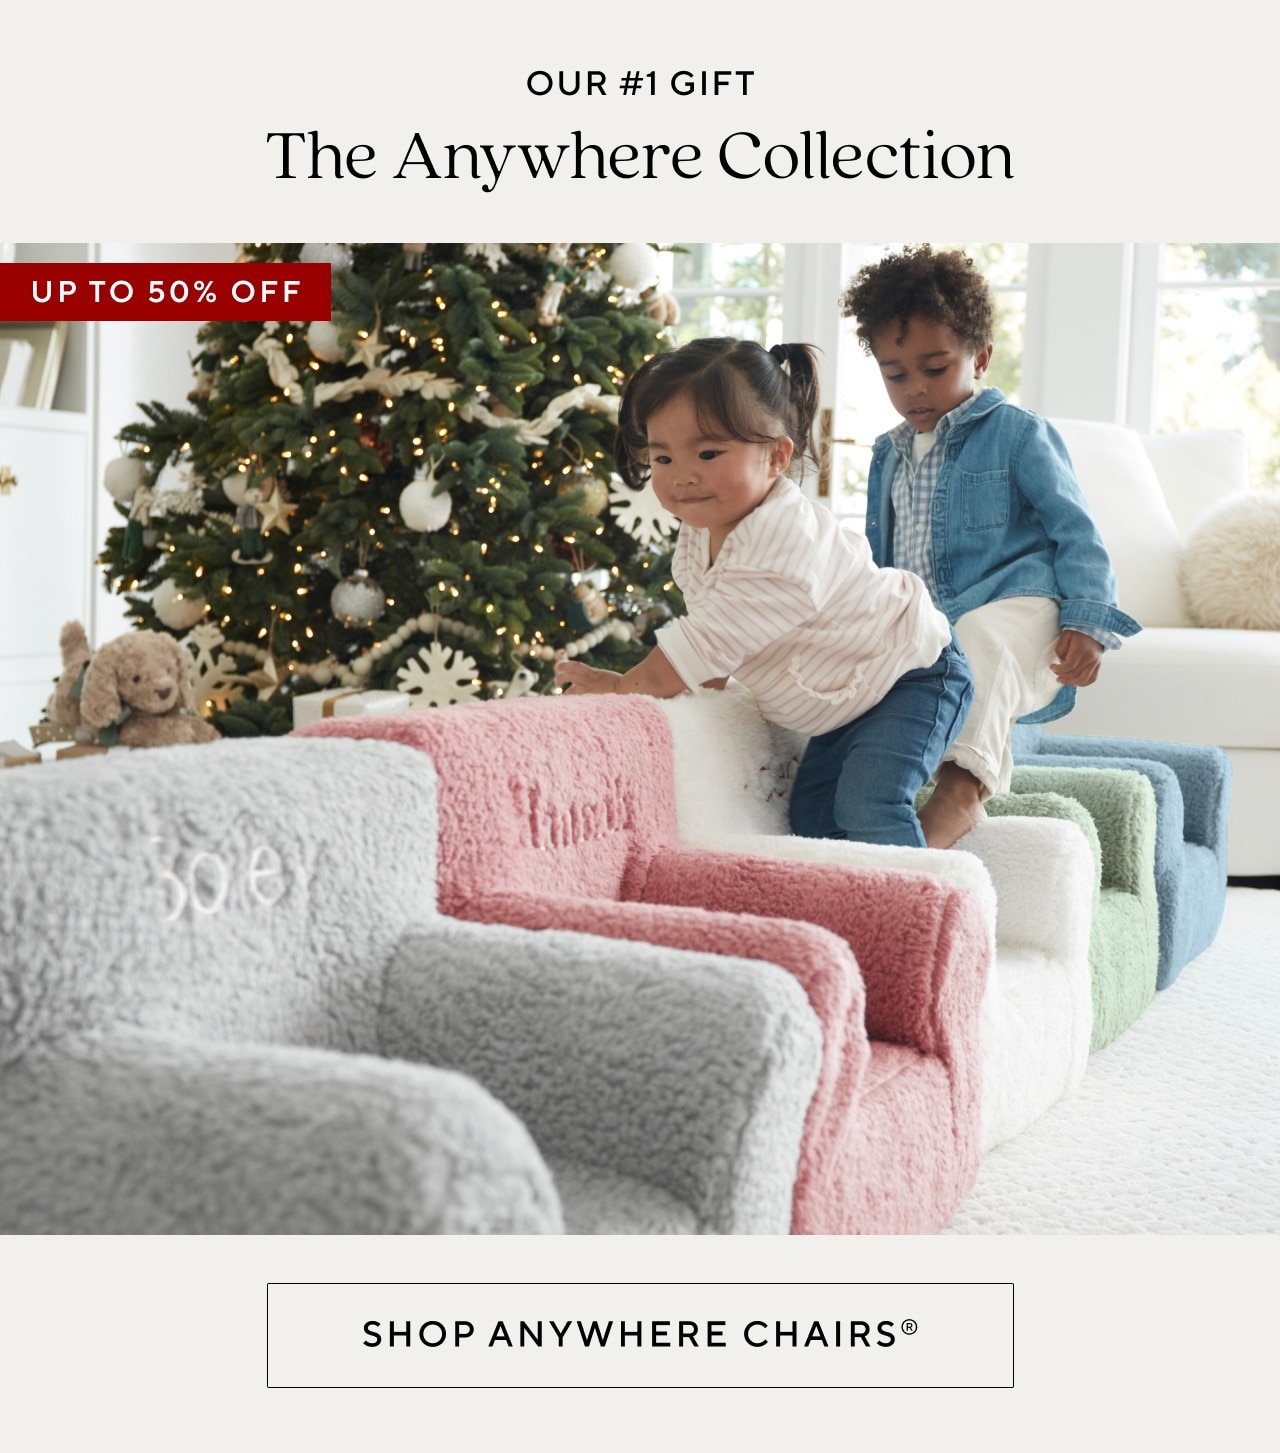 OUR #1 GIFT - THE ANYWHERE COLLECTION